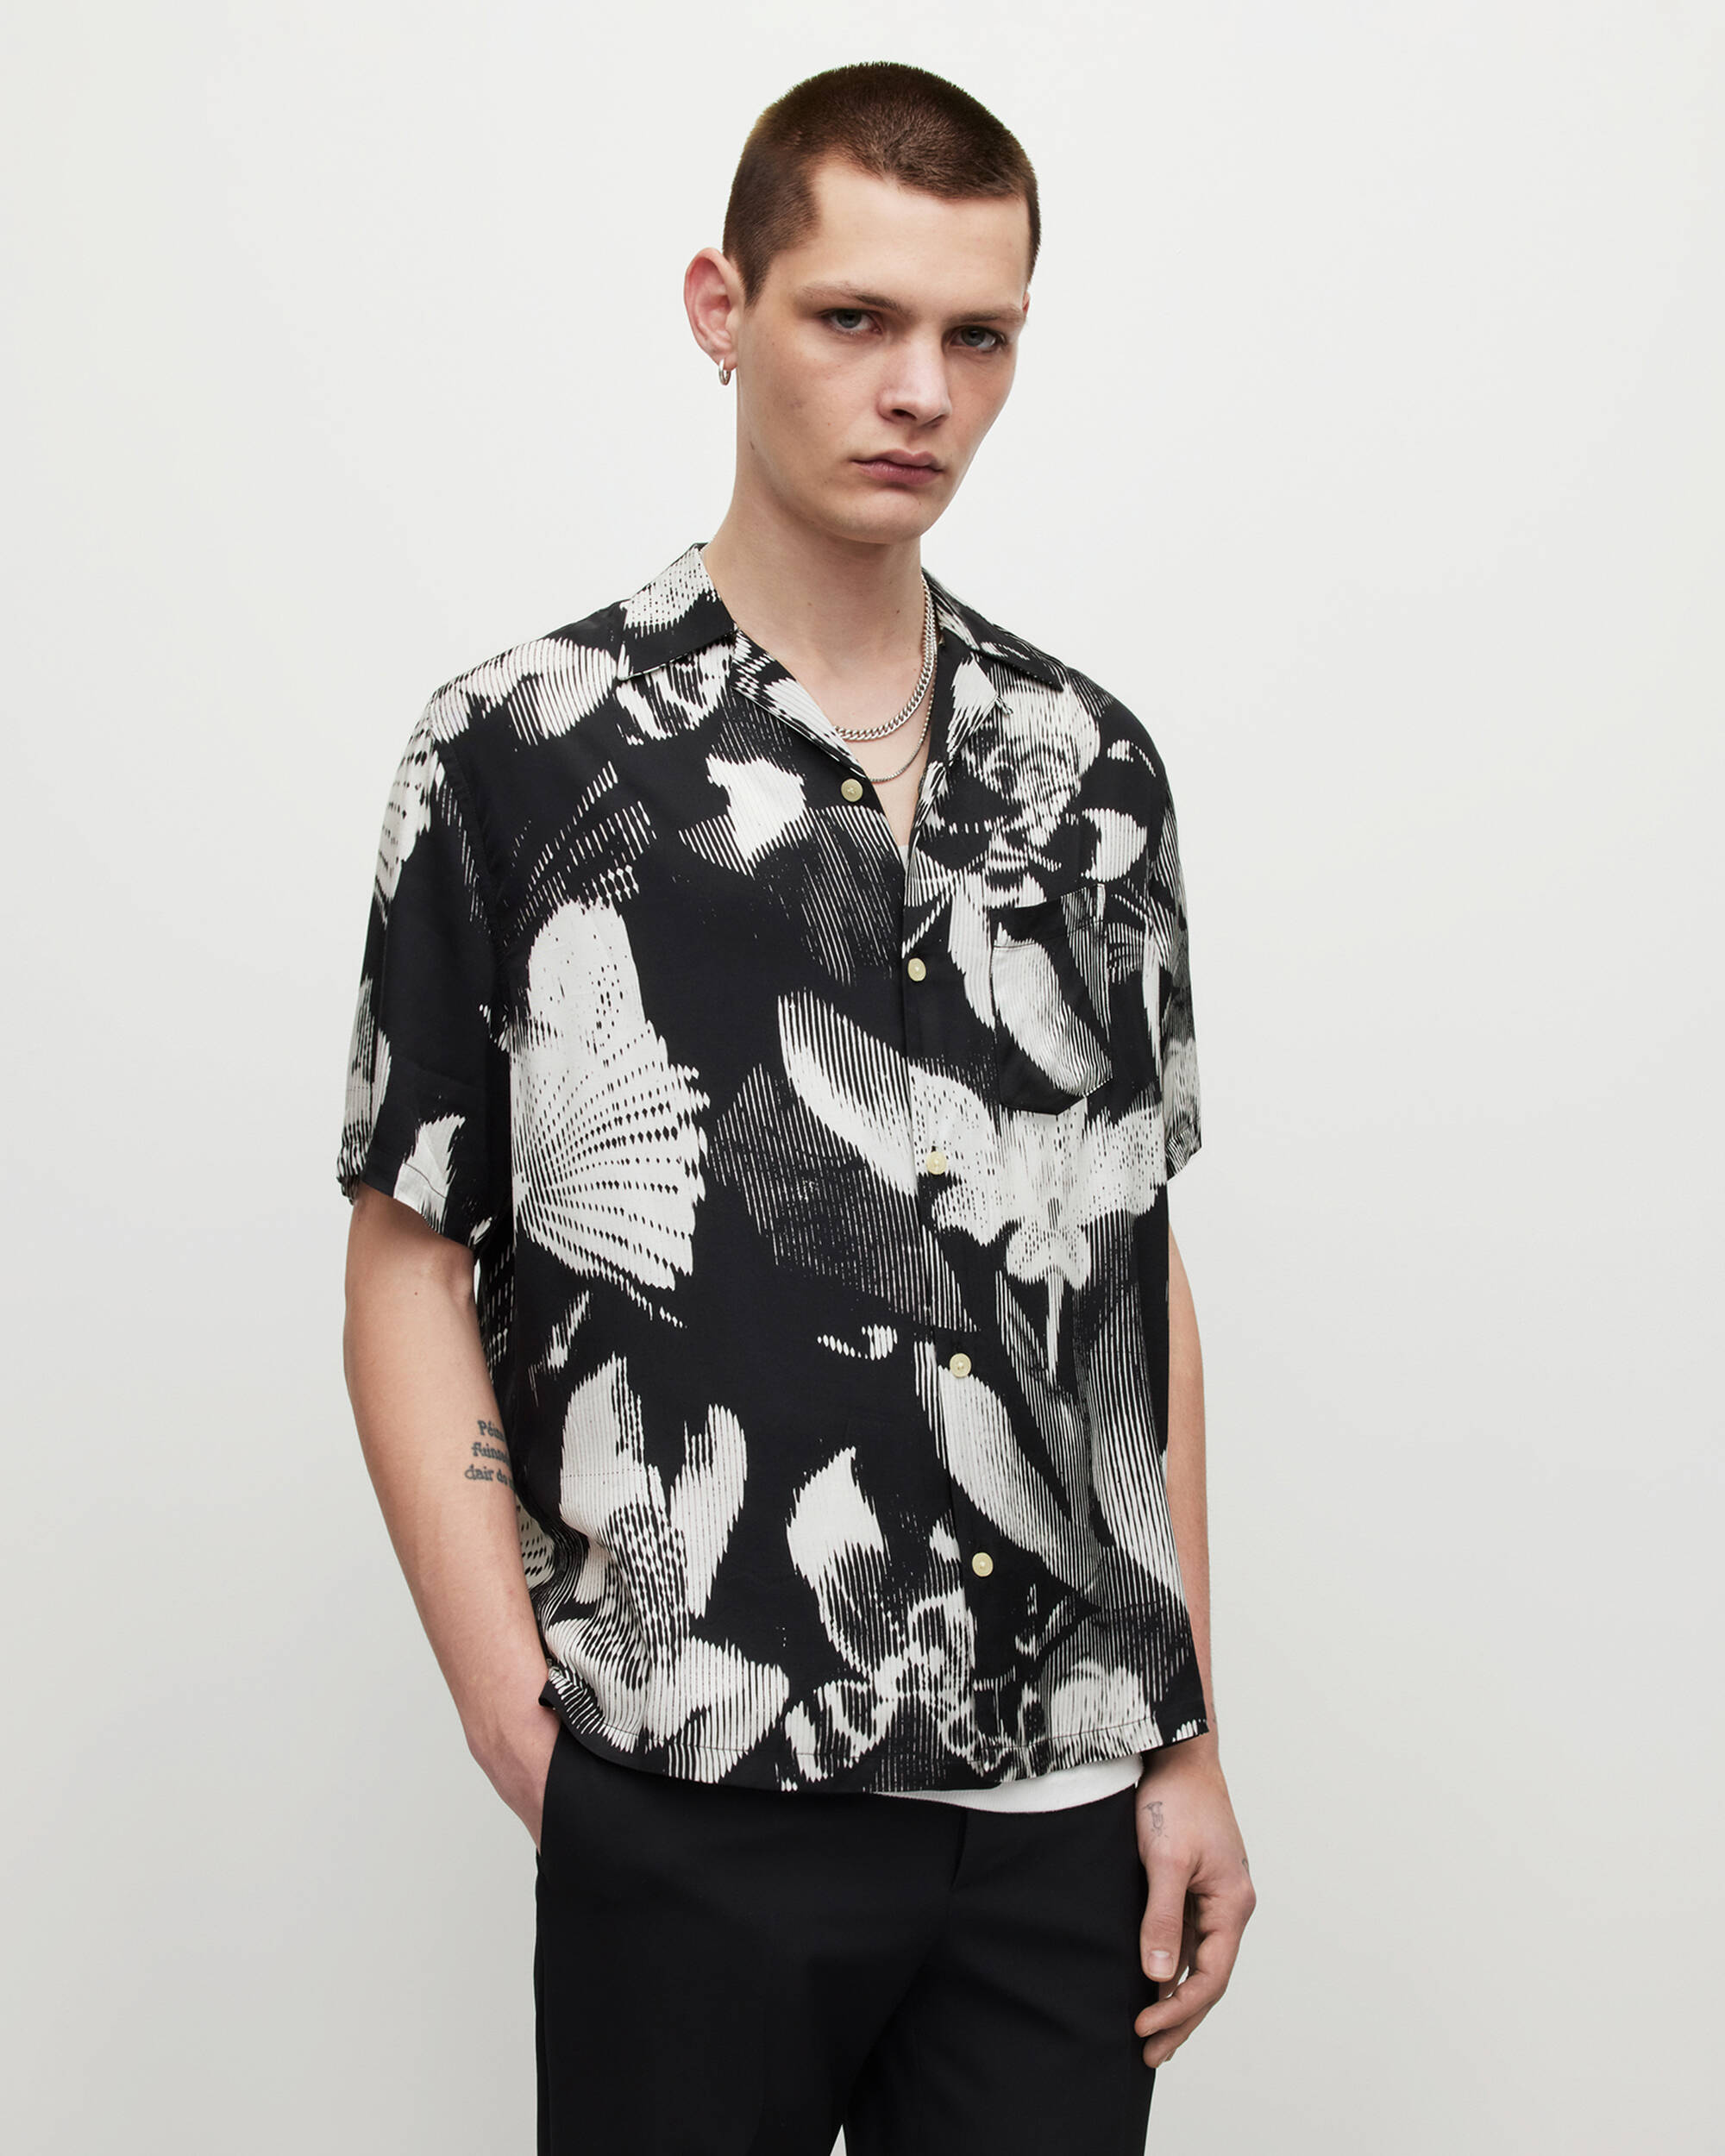 FREQUENCY FLORAL SHIRT